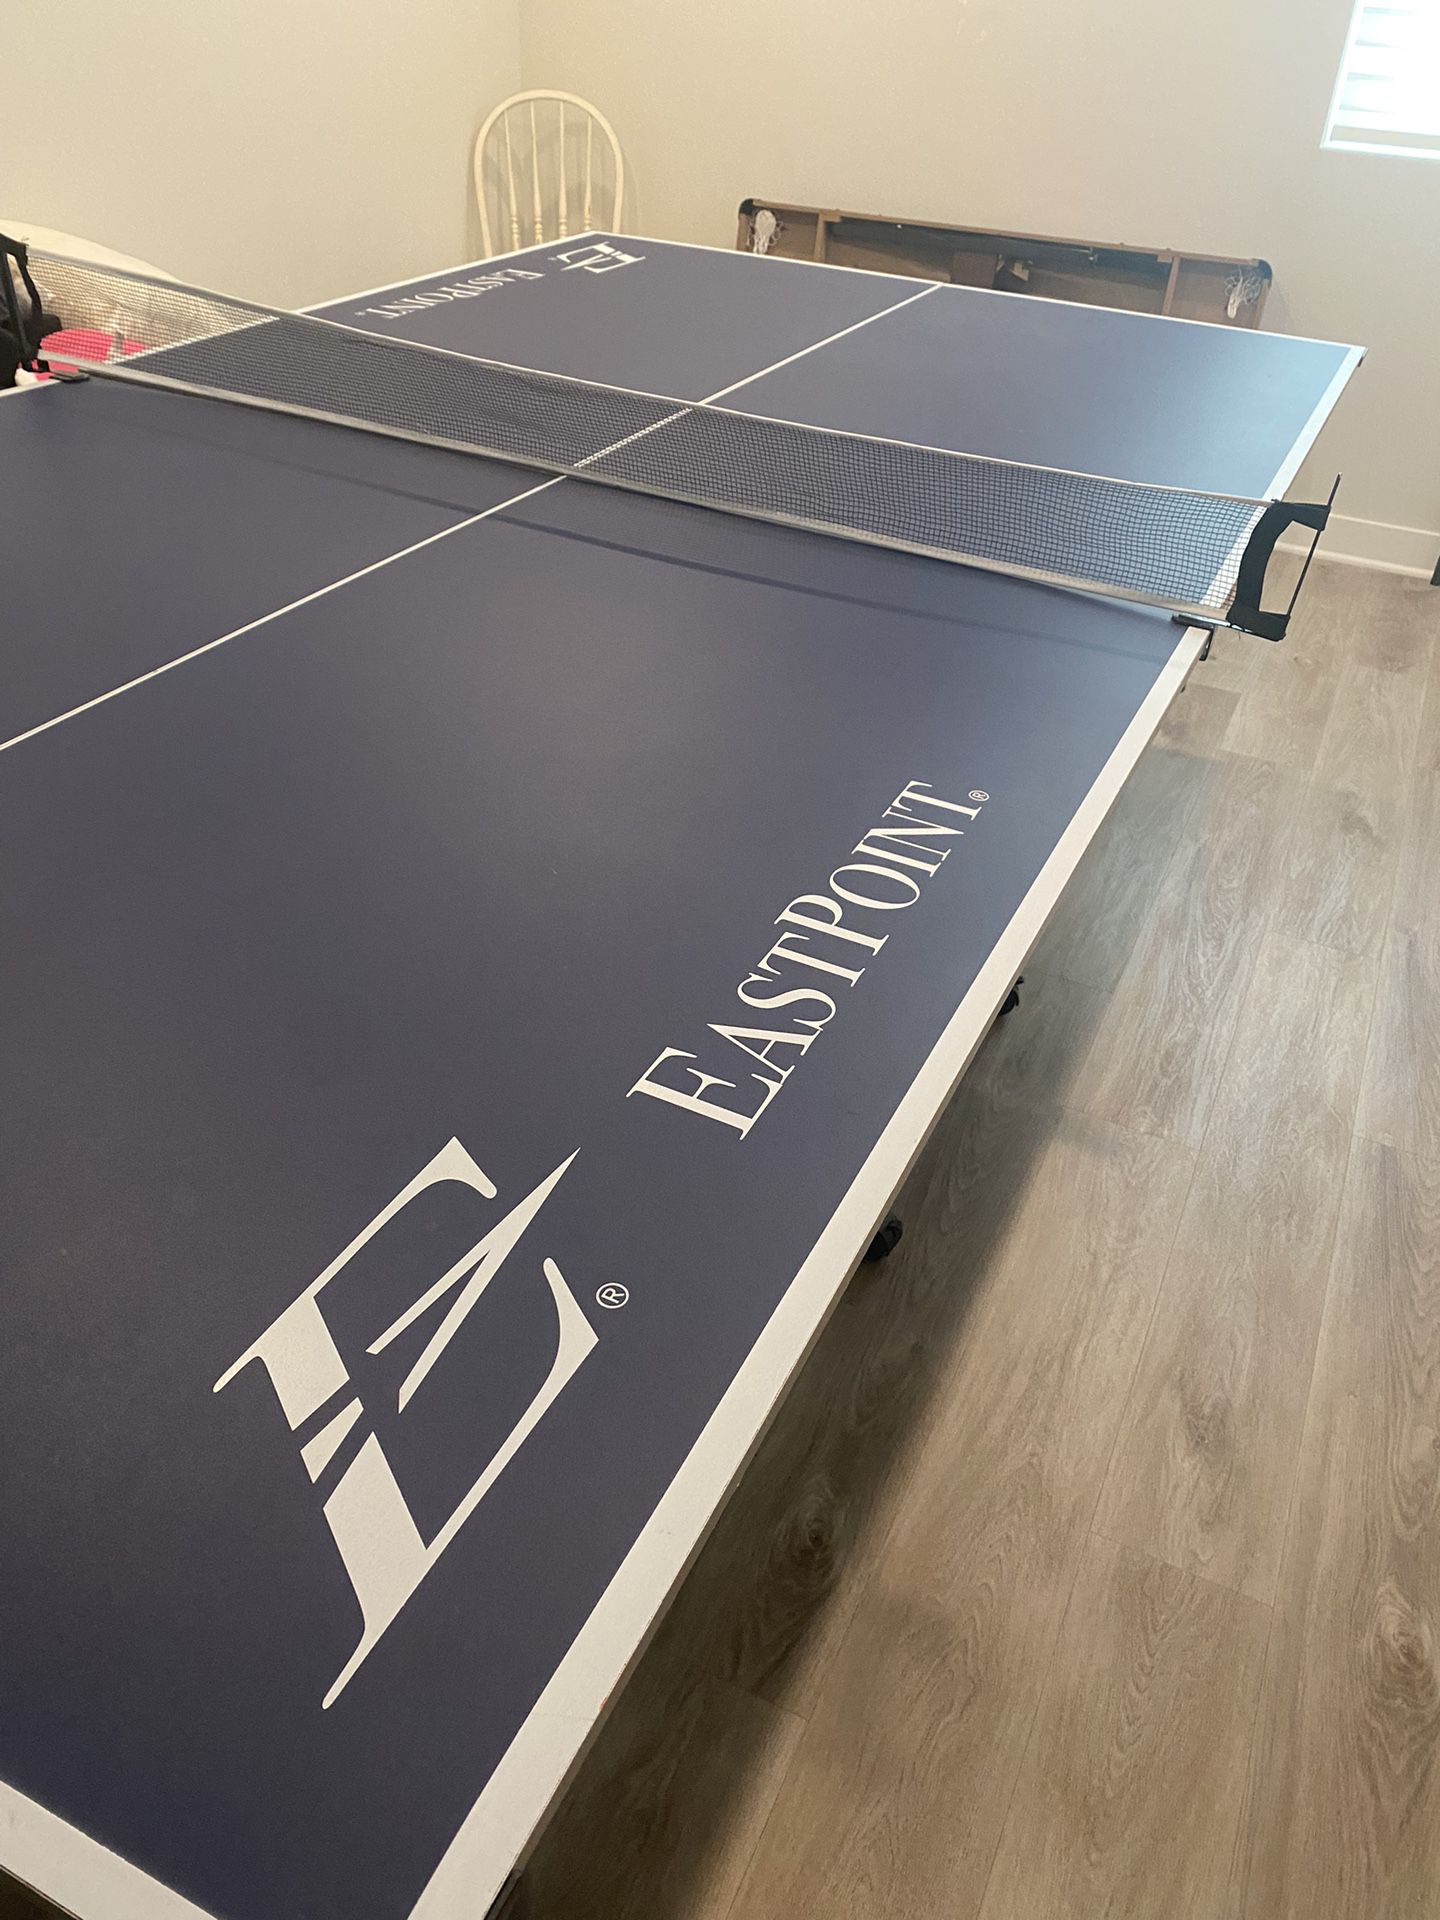 Ping Pong Table - Regulation Size